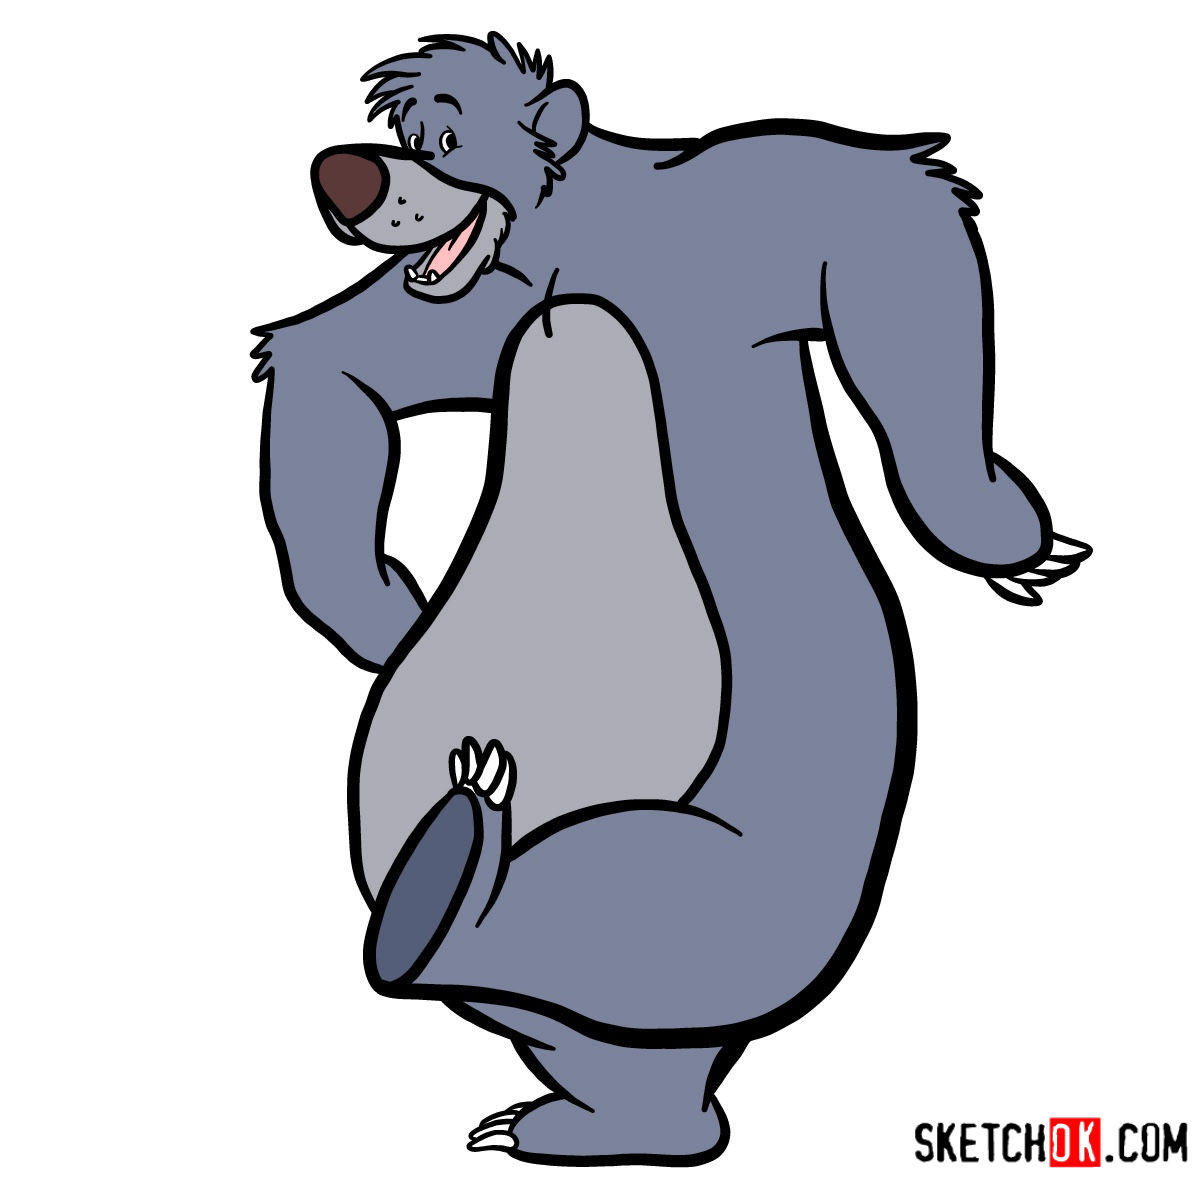 How to draw Baloo from the Jungle Book - Sketchok easy drawing guides